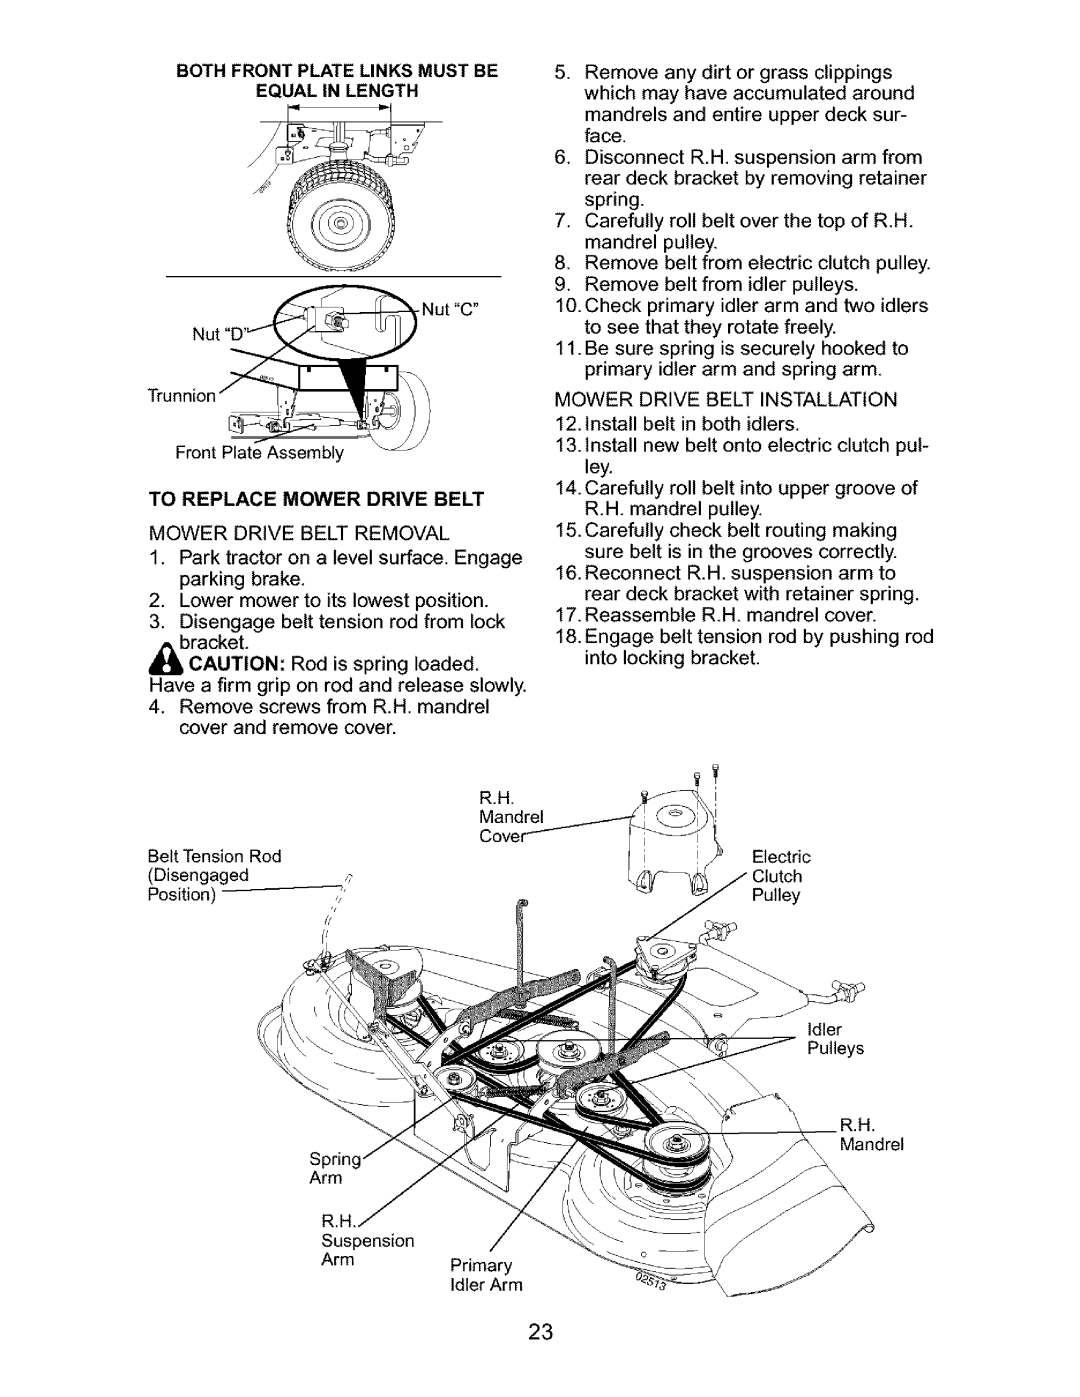 Craftsman 917.27632 owner manual Both Front Plate Links Must Be Equal In Length, To Replace Mower Drive Belt 